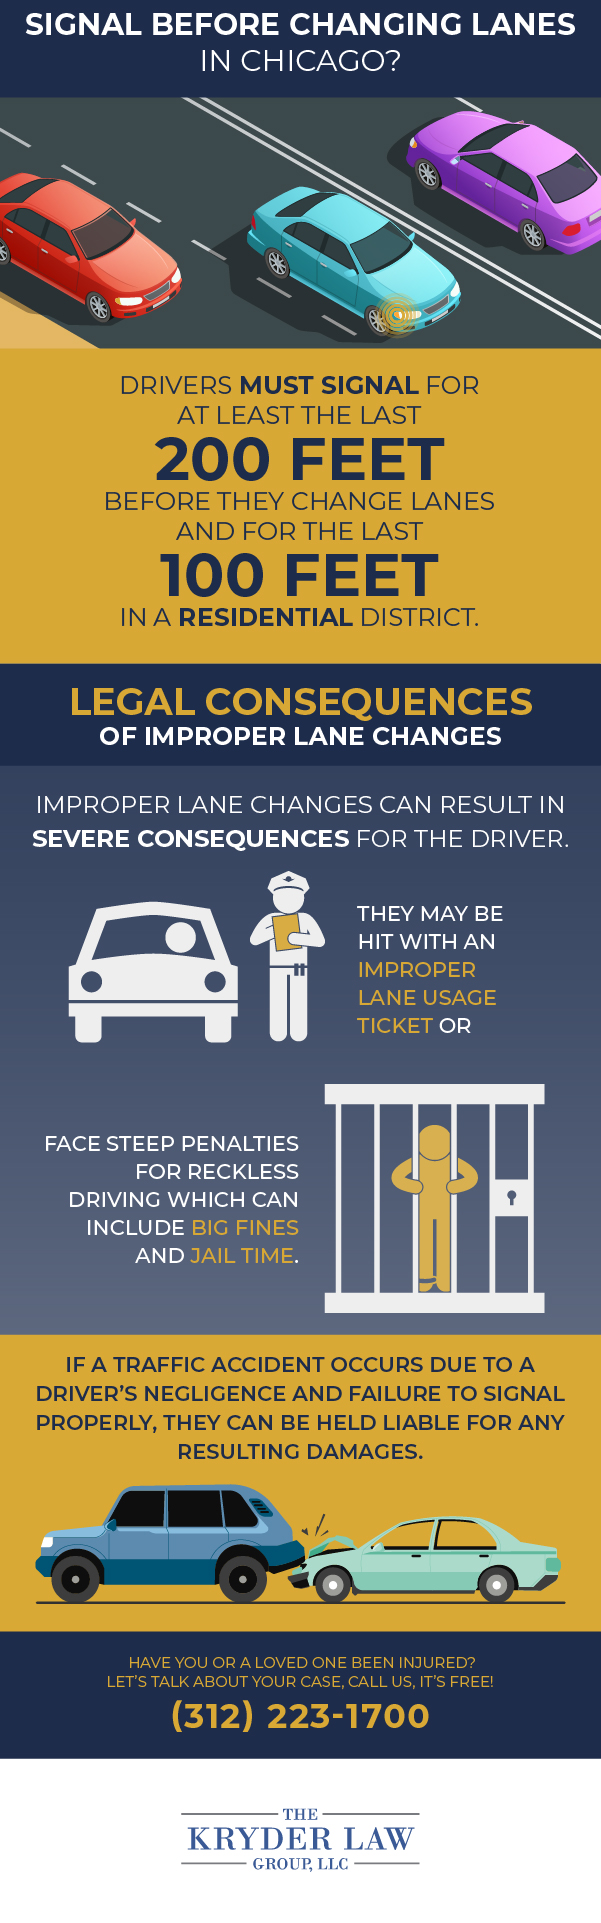 Chicago Unsafe Lane Change Accident Lawyers, Car Accident Lawyer, The  Kryder Law Group, LLC